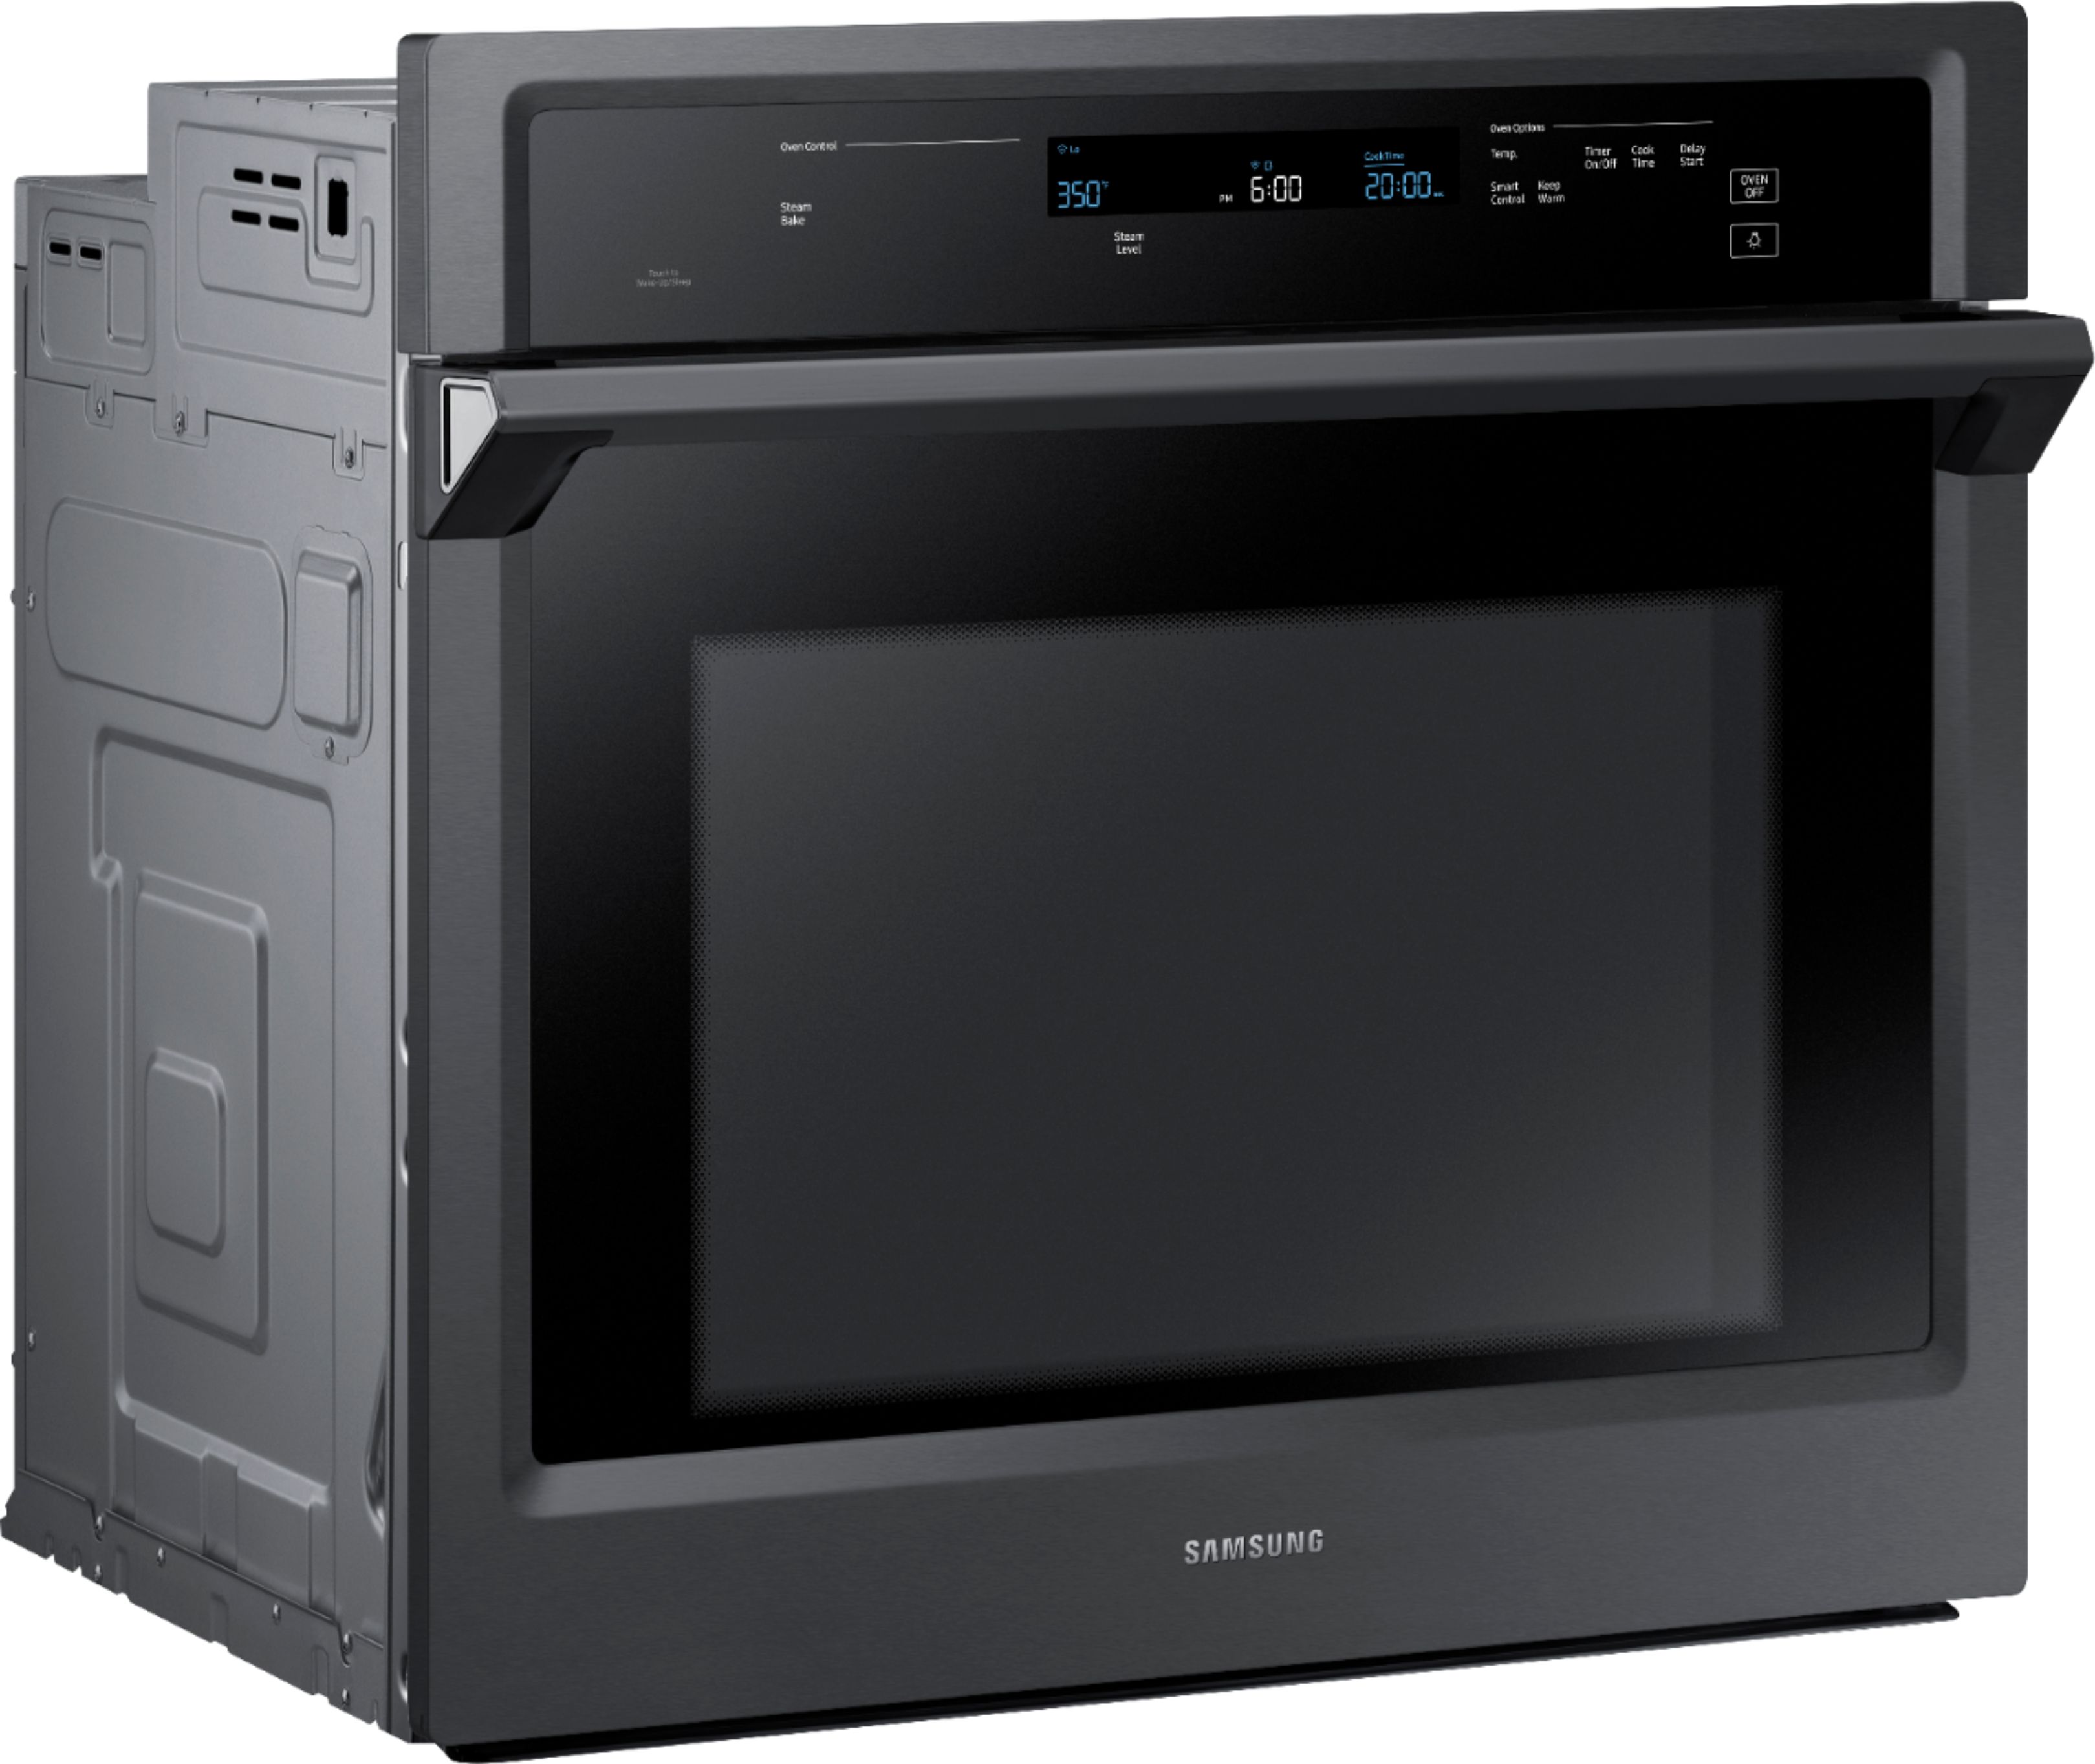 Angle View: GE - 30" Built-In Single Electric Wall Oven - Stainless steel